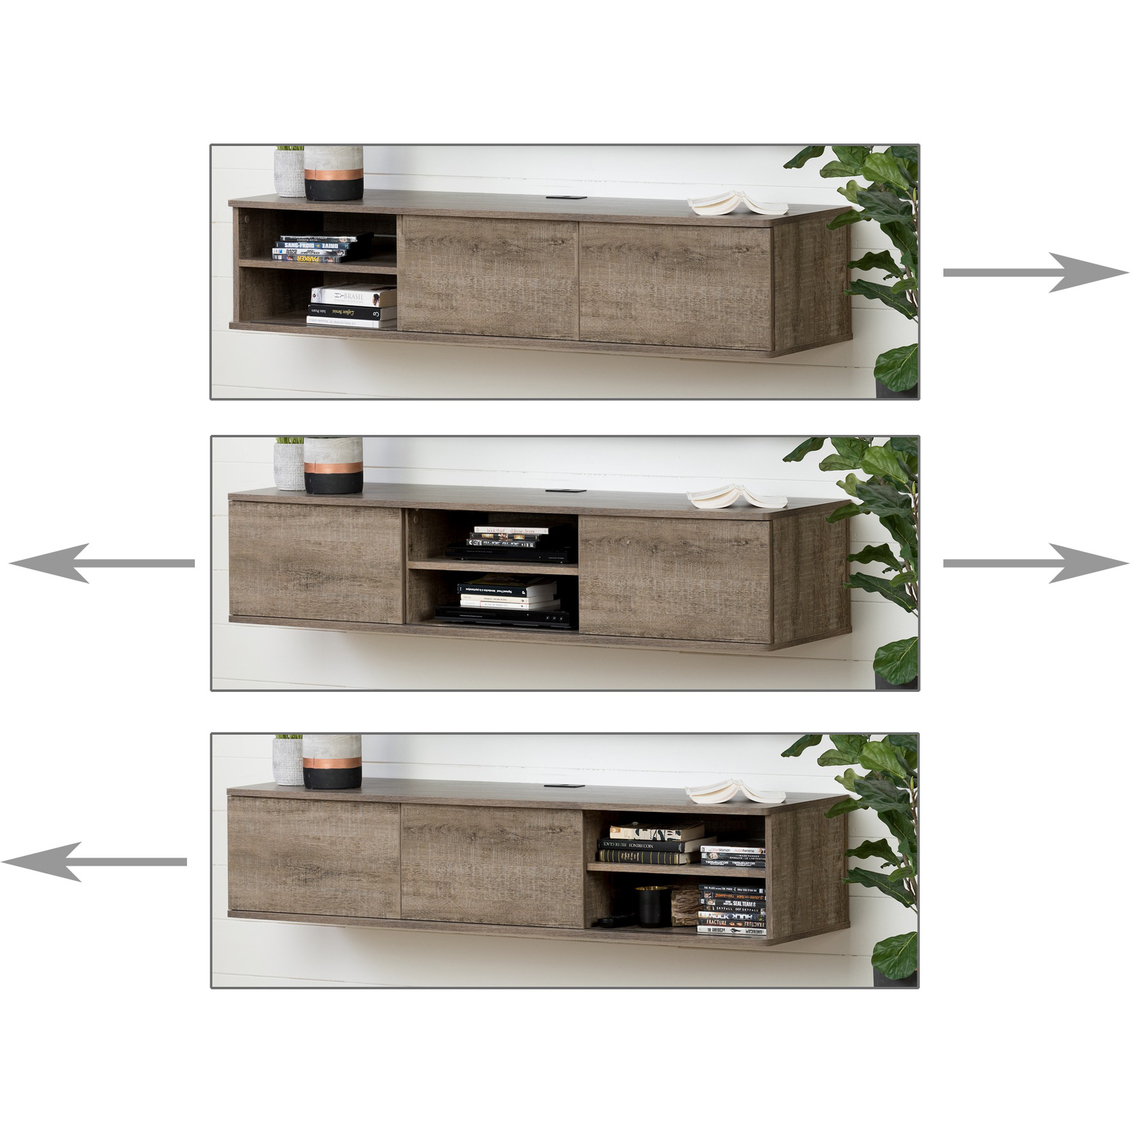 South Shore Agora 56 in. Wall Mounted Media Console - Image 4 of 7